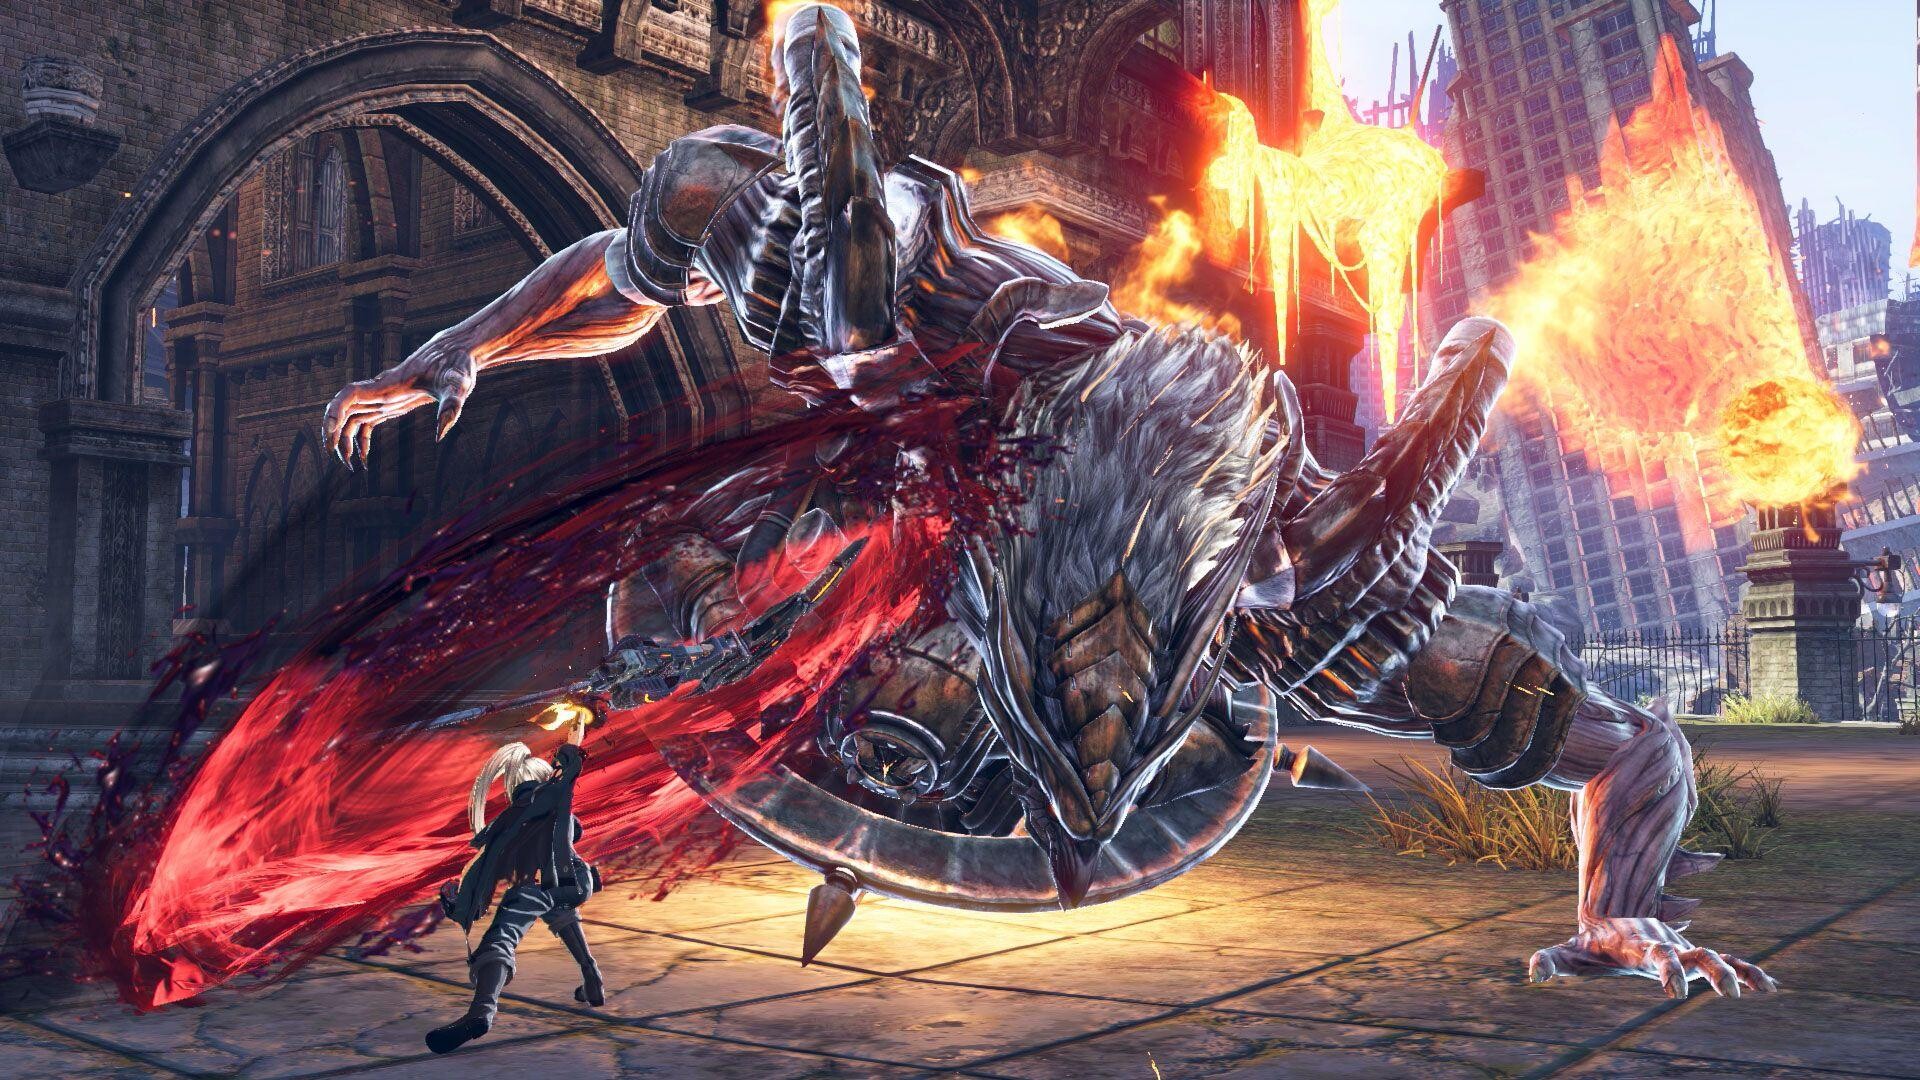 God Eater (Game): Ra, A radiant Ash Aragami that carries miniature suns in its hands. 1920x1080 Full HD Wallpaper.